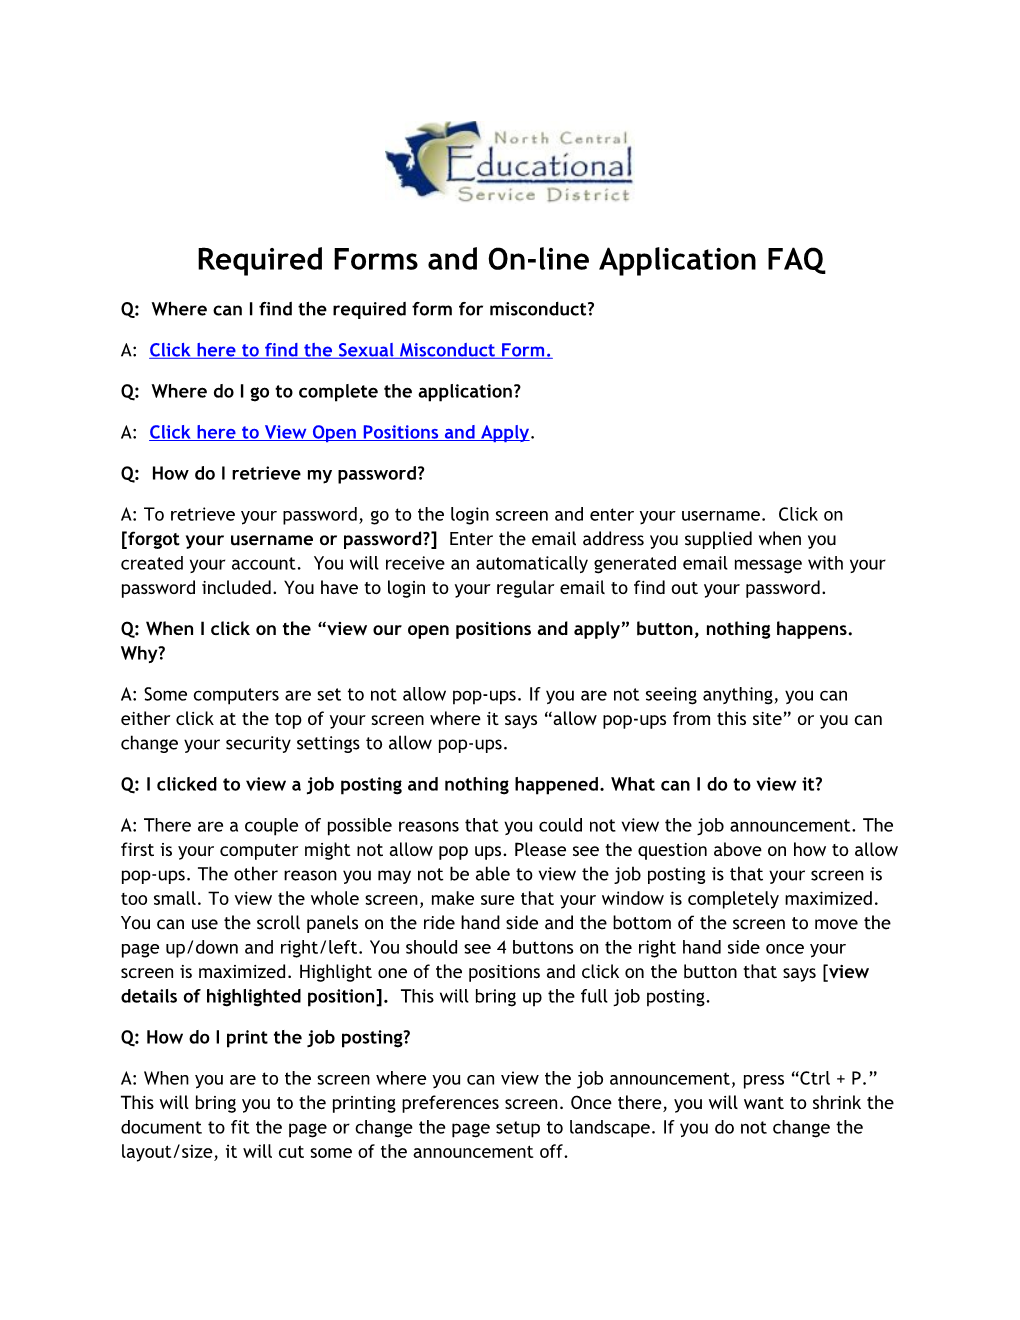 Required Forms and On-Line Application FAQ